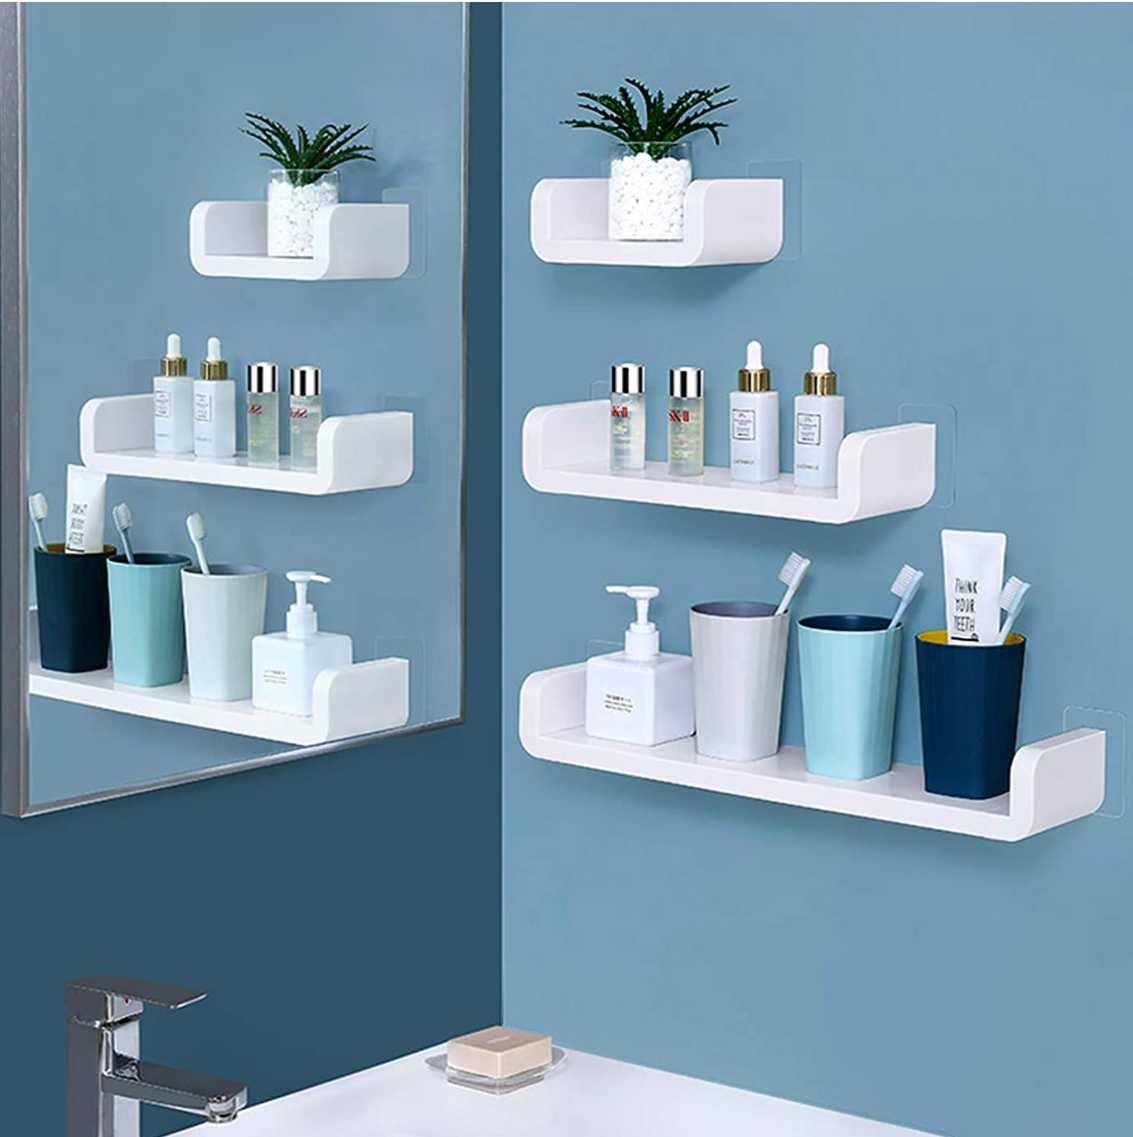 No-Drill, Self-Adhesive Floating Bathroom Shelves Wall Mounted [2 Pack]